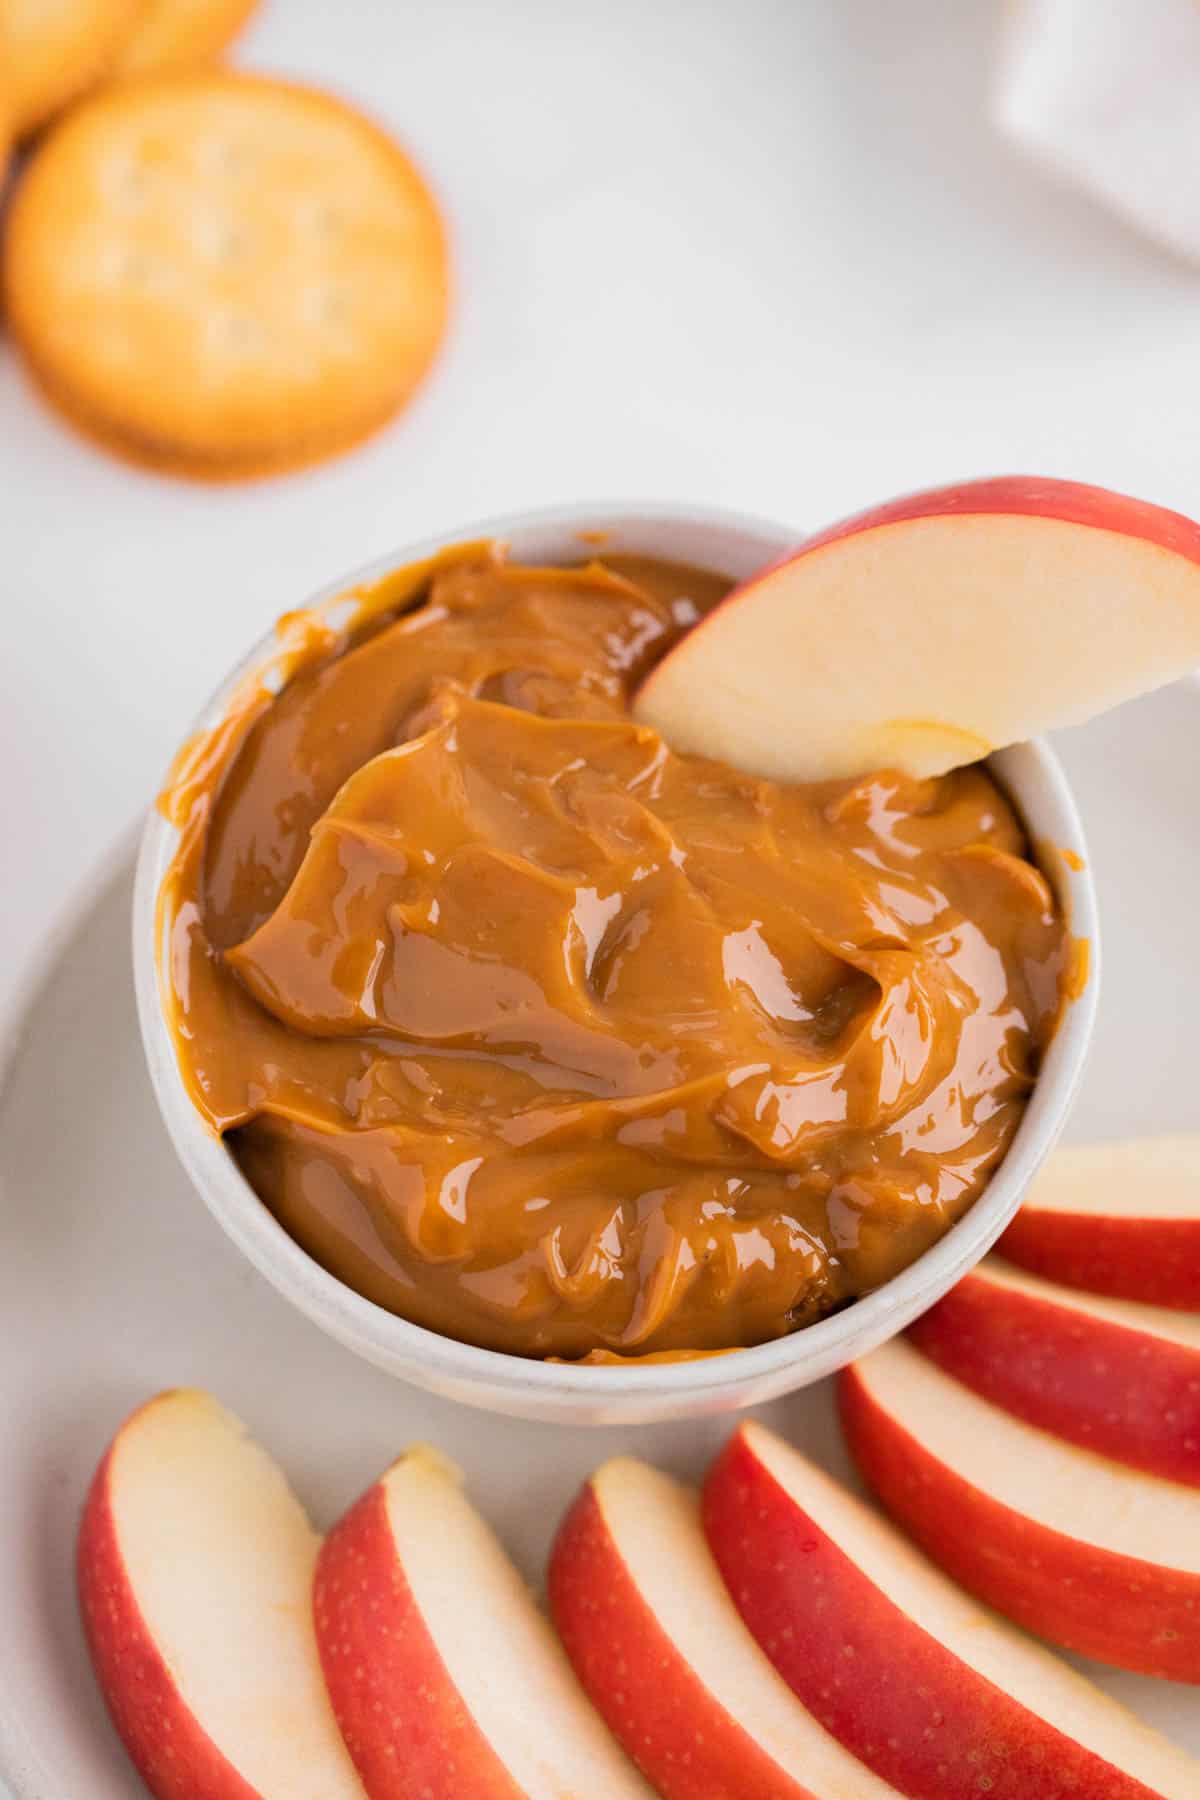 A plate of sliced apples with dulce de leche.